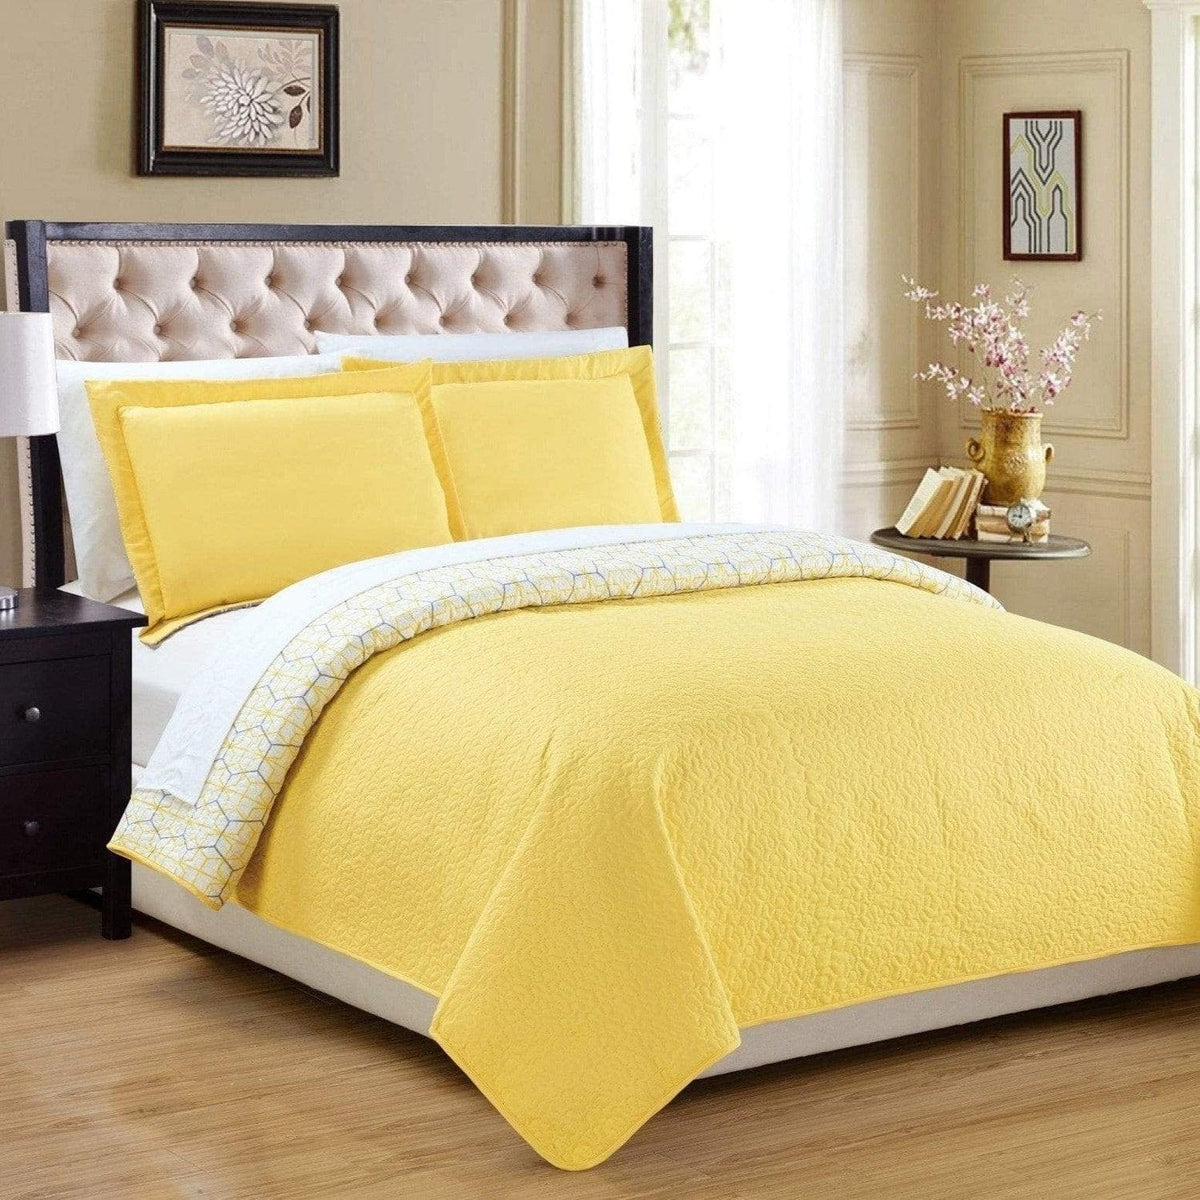 Chic Home Lori 3 Piece Reversible Quilt Set Yellow